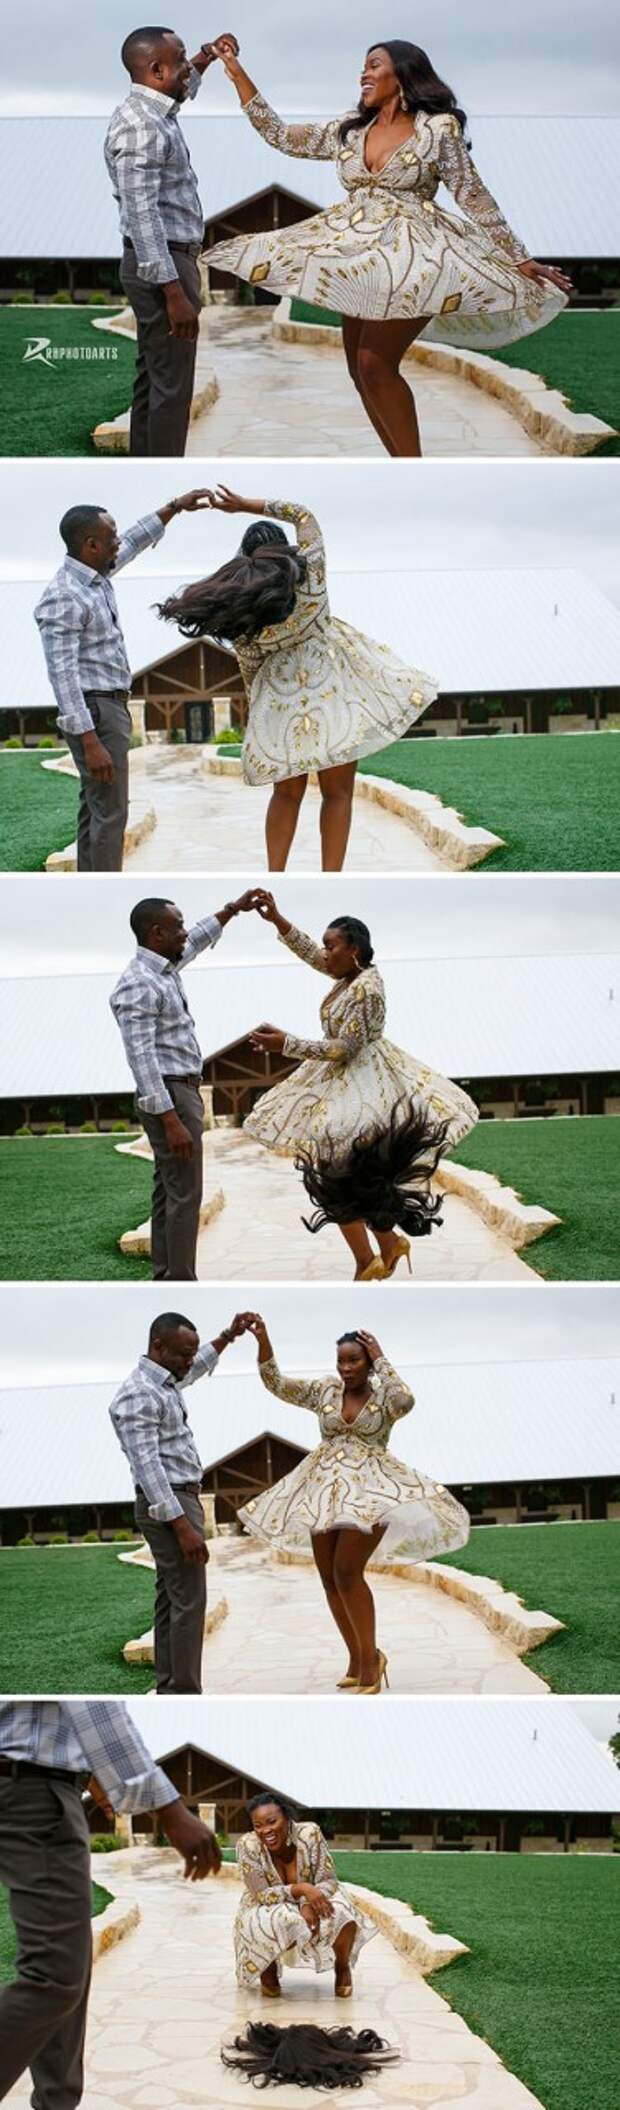 Bride-To-Be's Wig Fell Off During The Engagement Shoot, But She Totally Owned The Moment